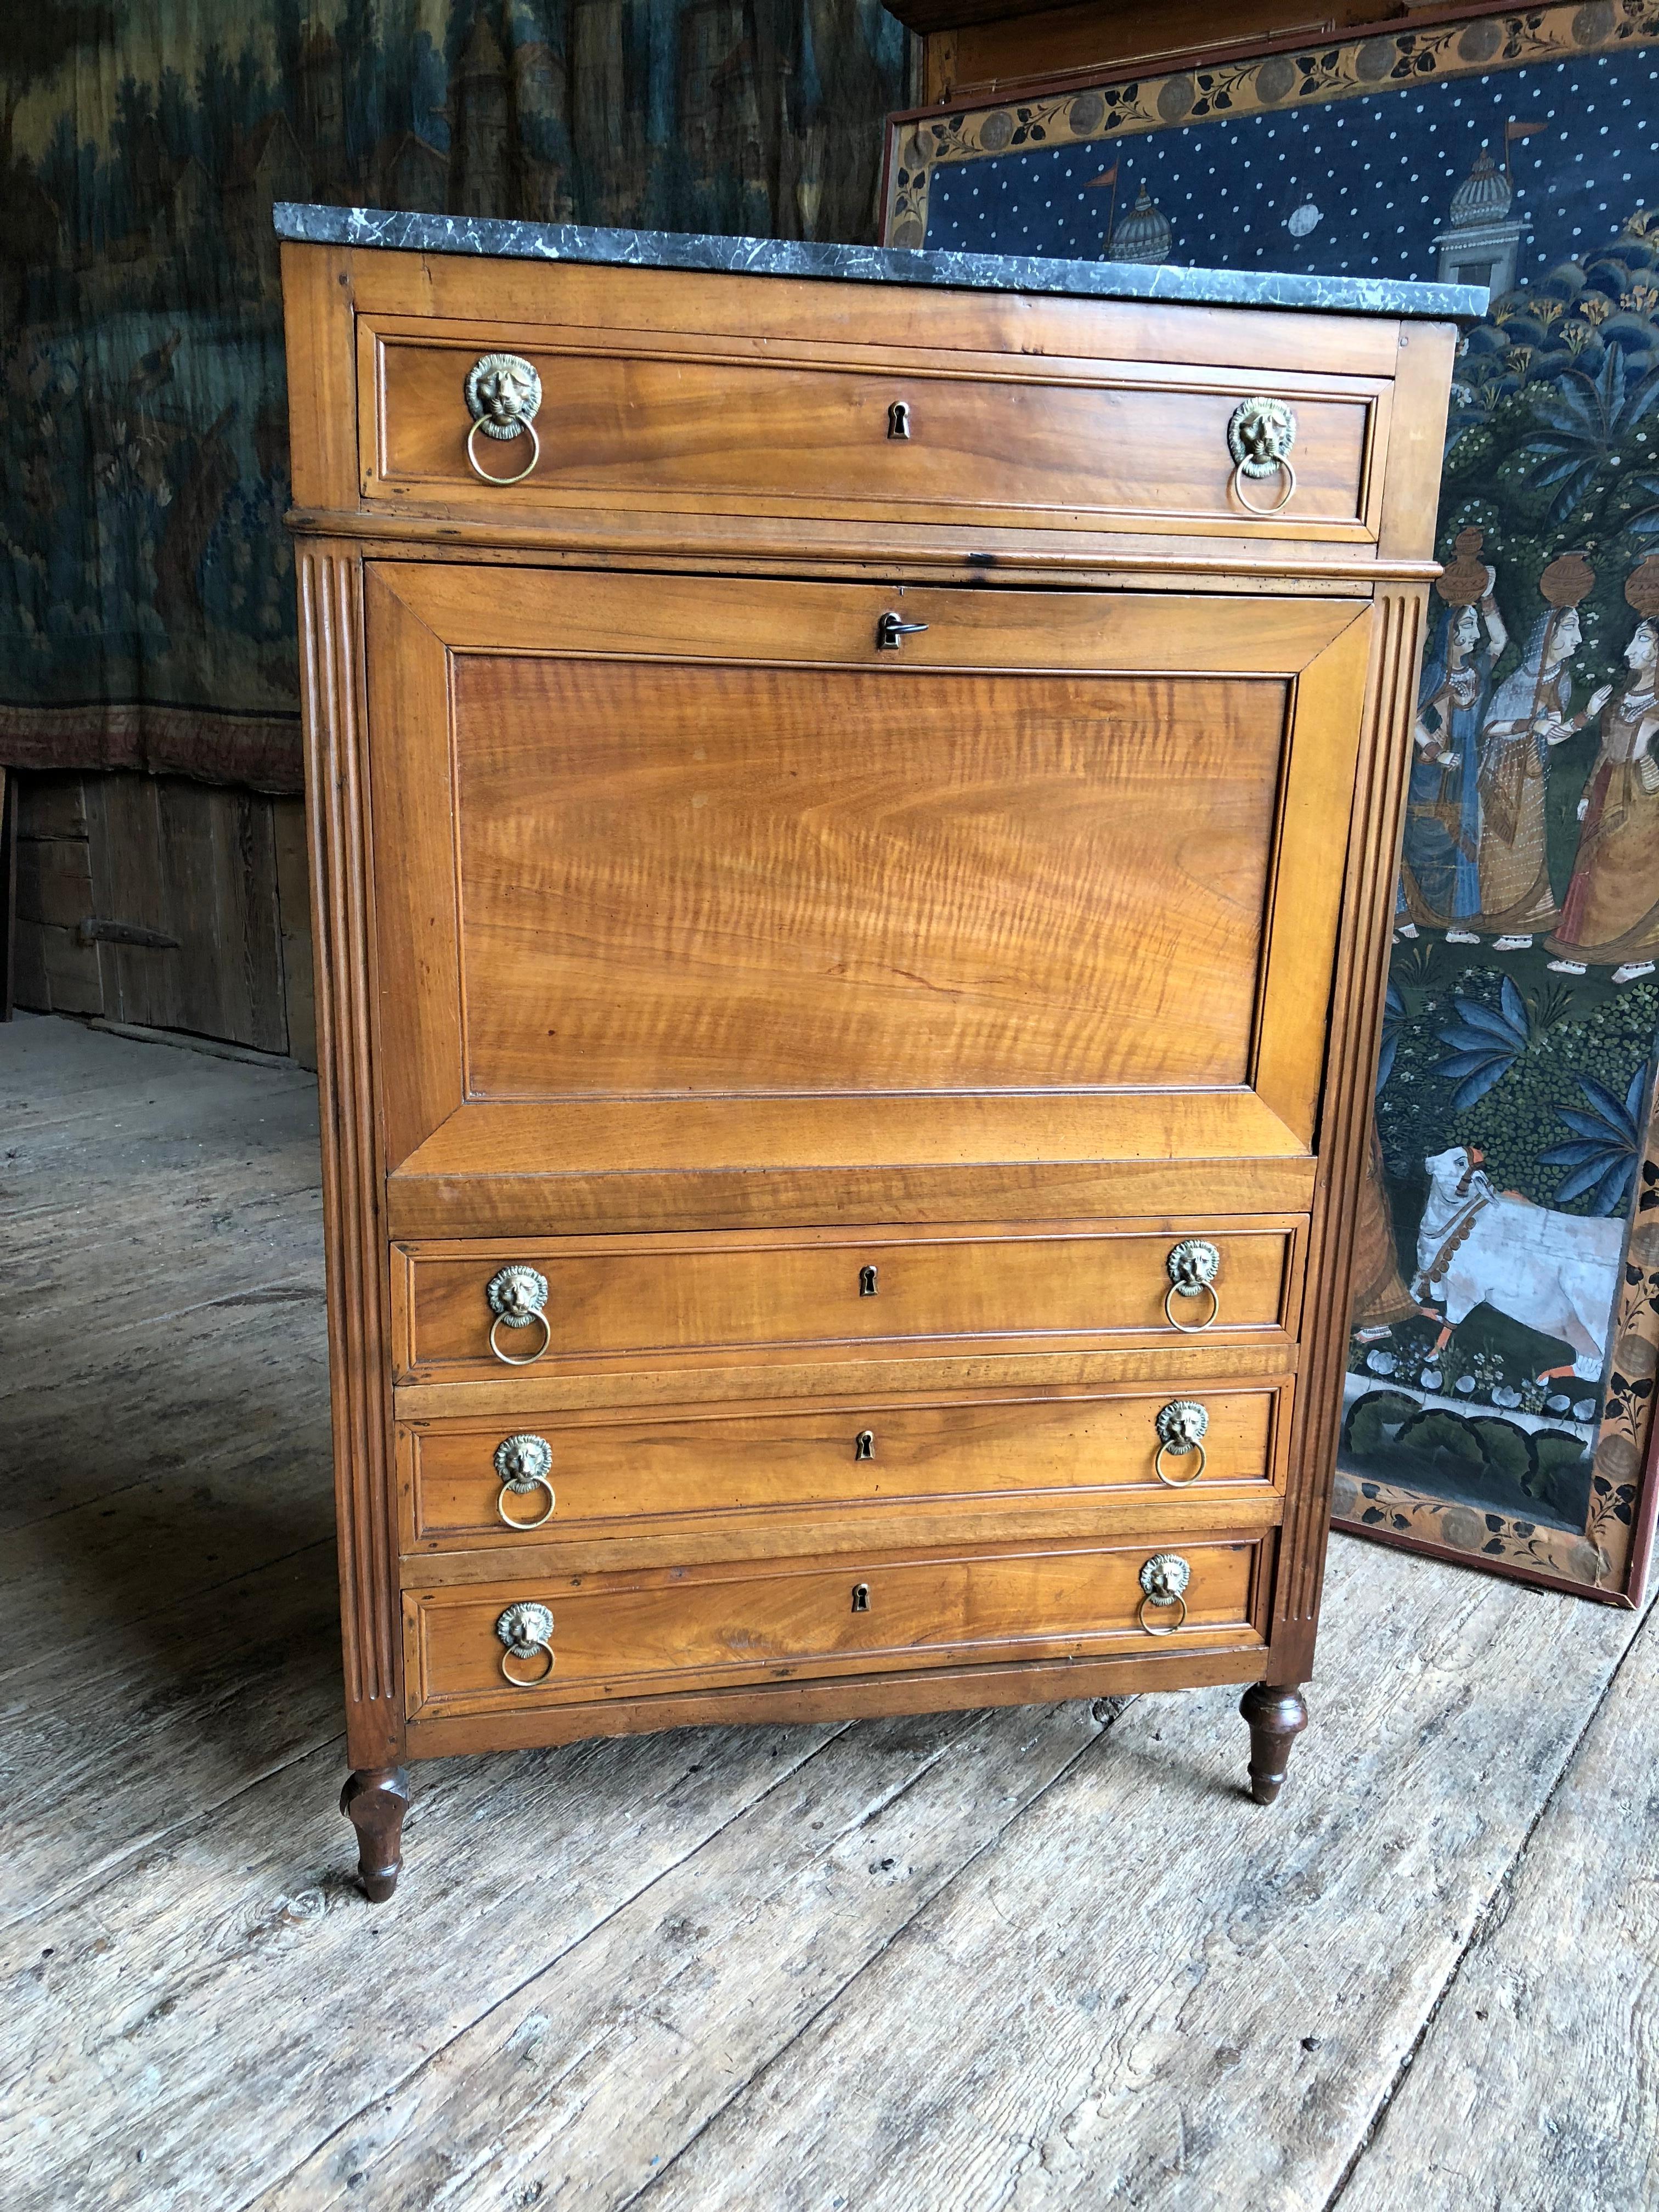 A nice Louis XVI drop-front secretaire desk in blonde walnut, circa 1790, with its original grey marble top, brass lion’s head drawer pulls and working lock and key. The interior is fitted with small drawers and shelves and retains its original